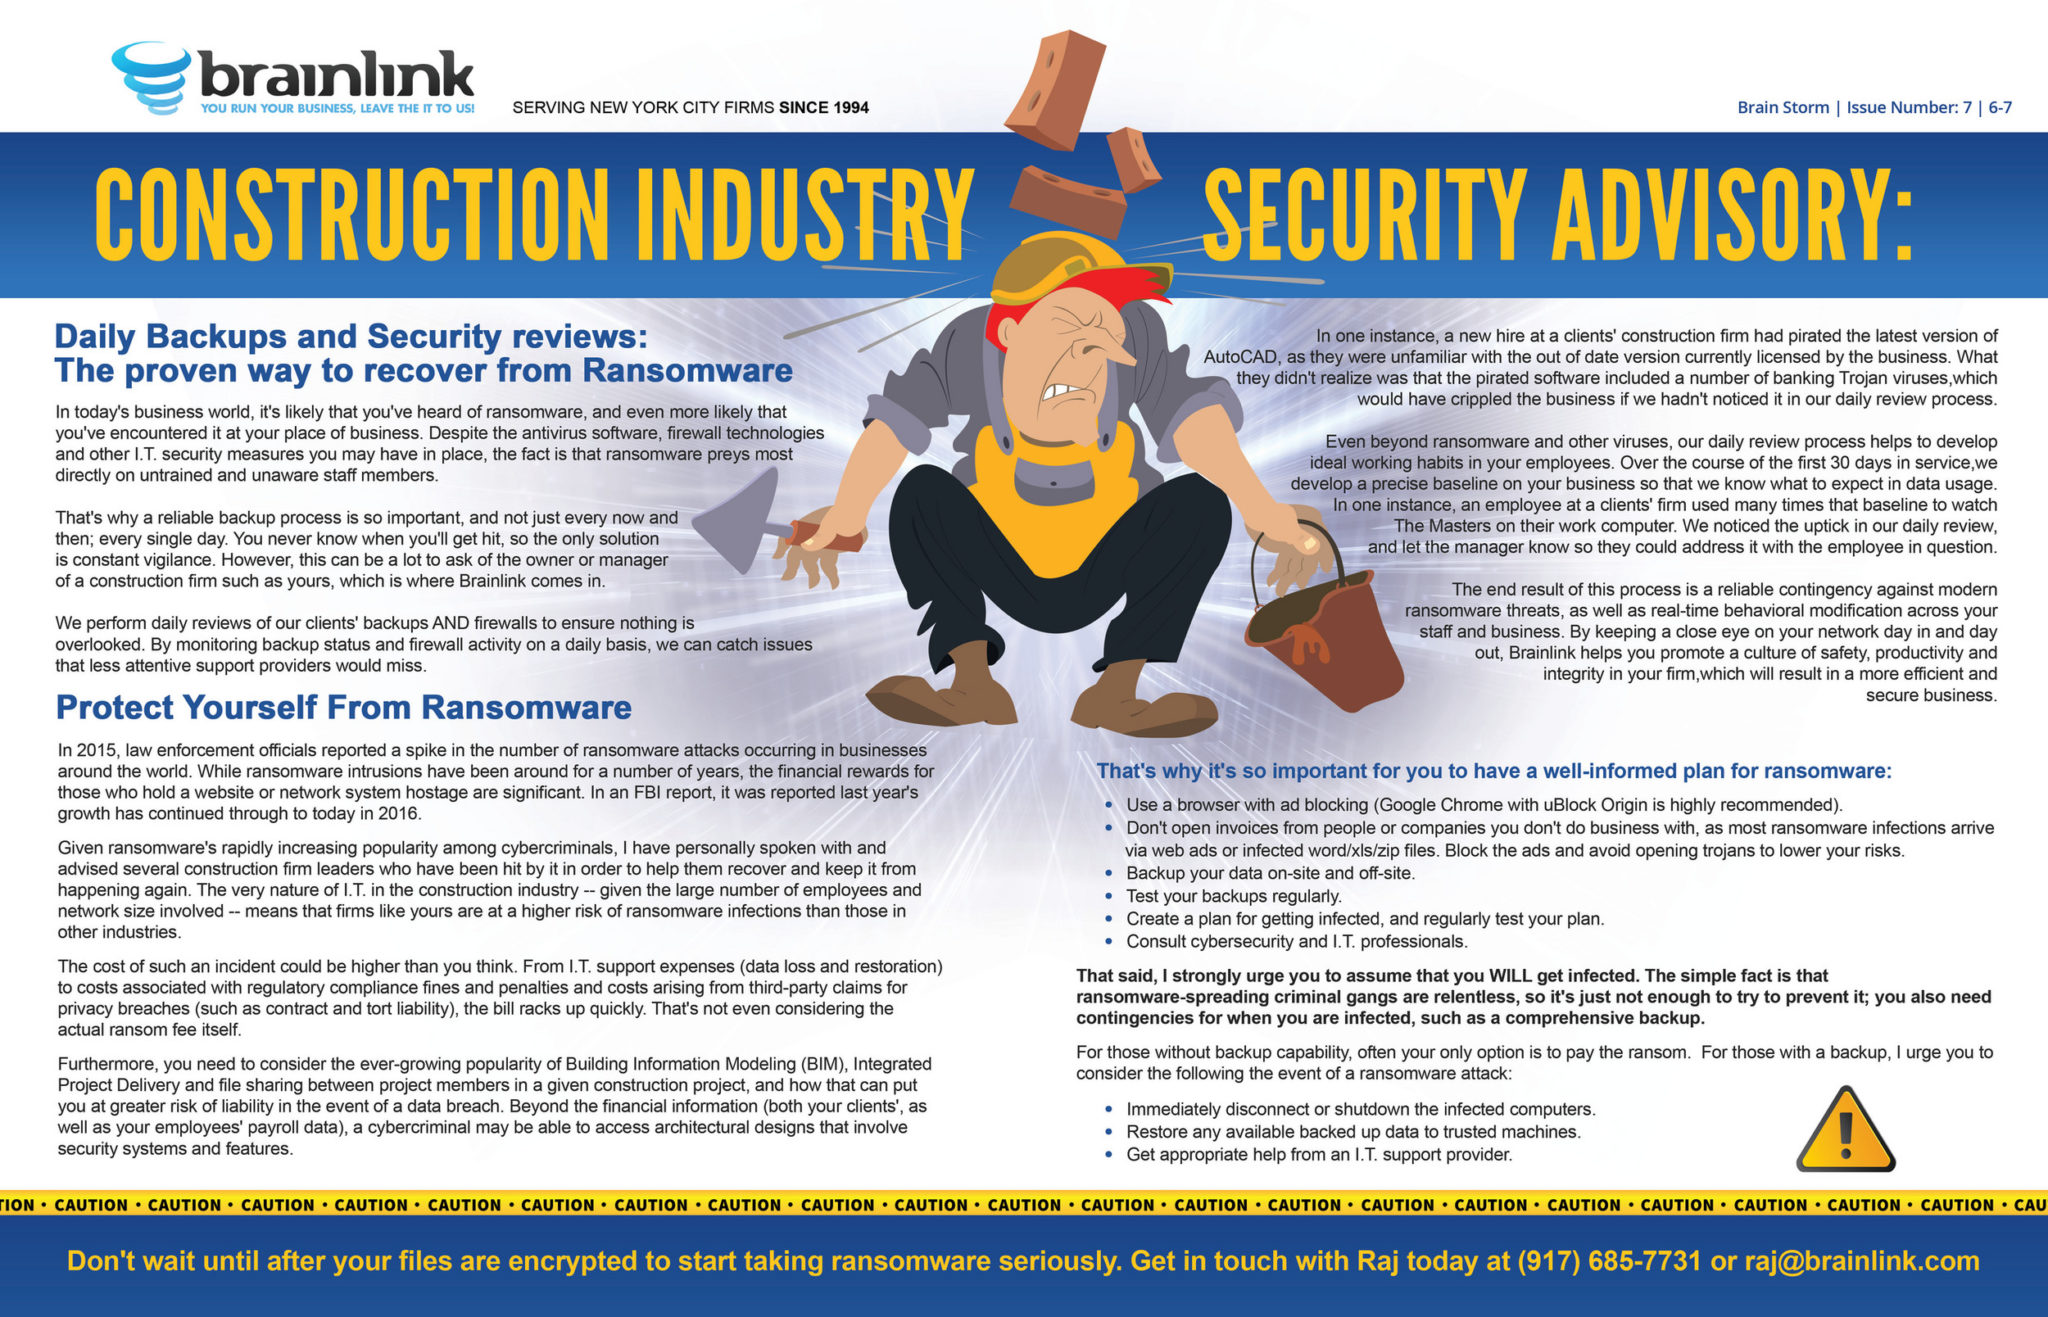 CyberSecurity For Contractors and Construction Firms